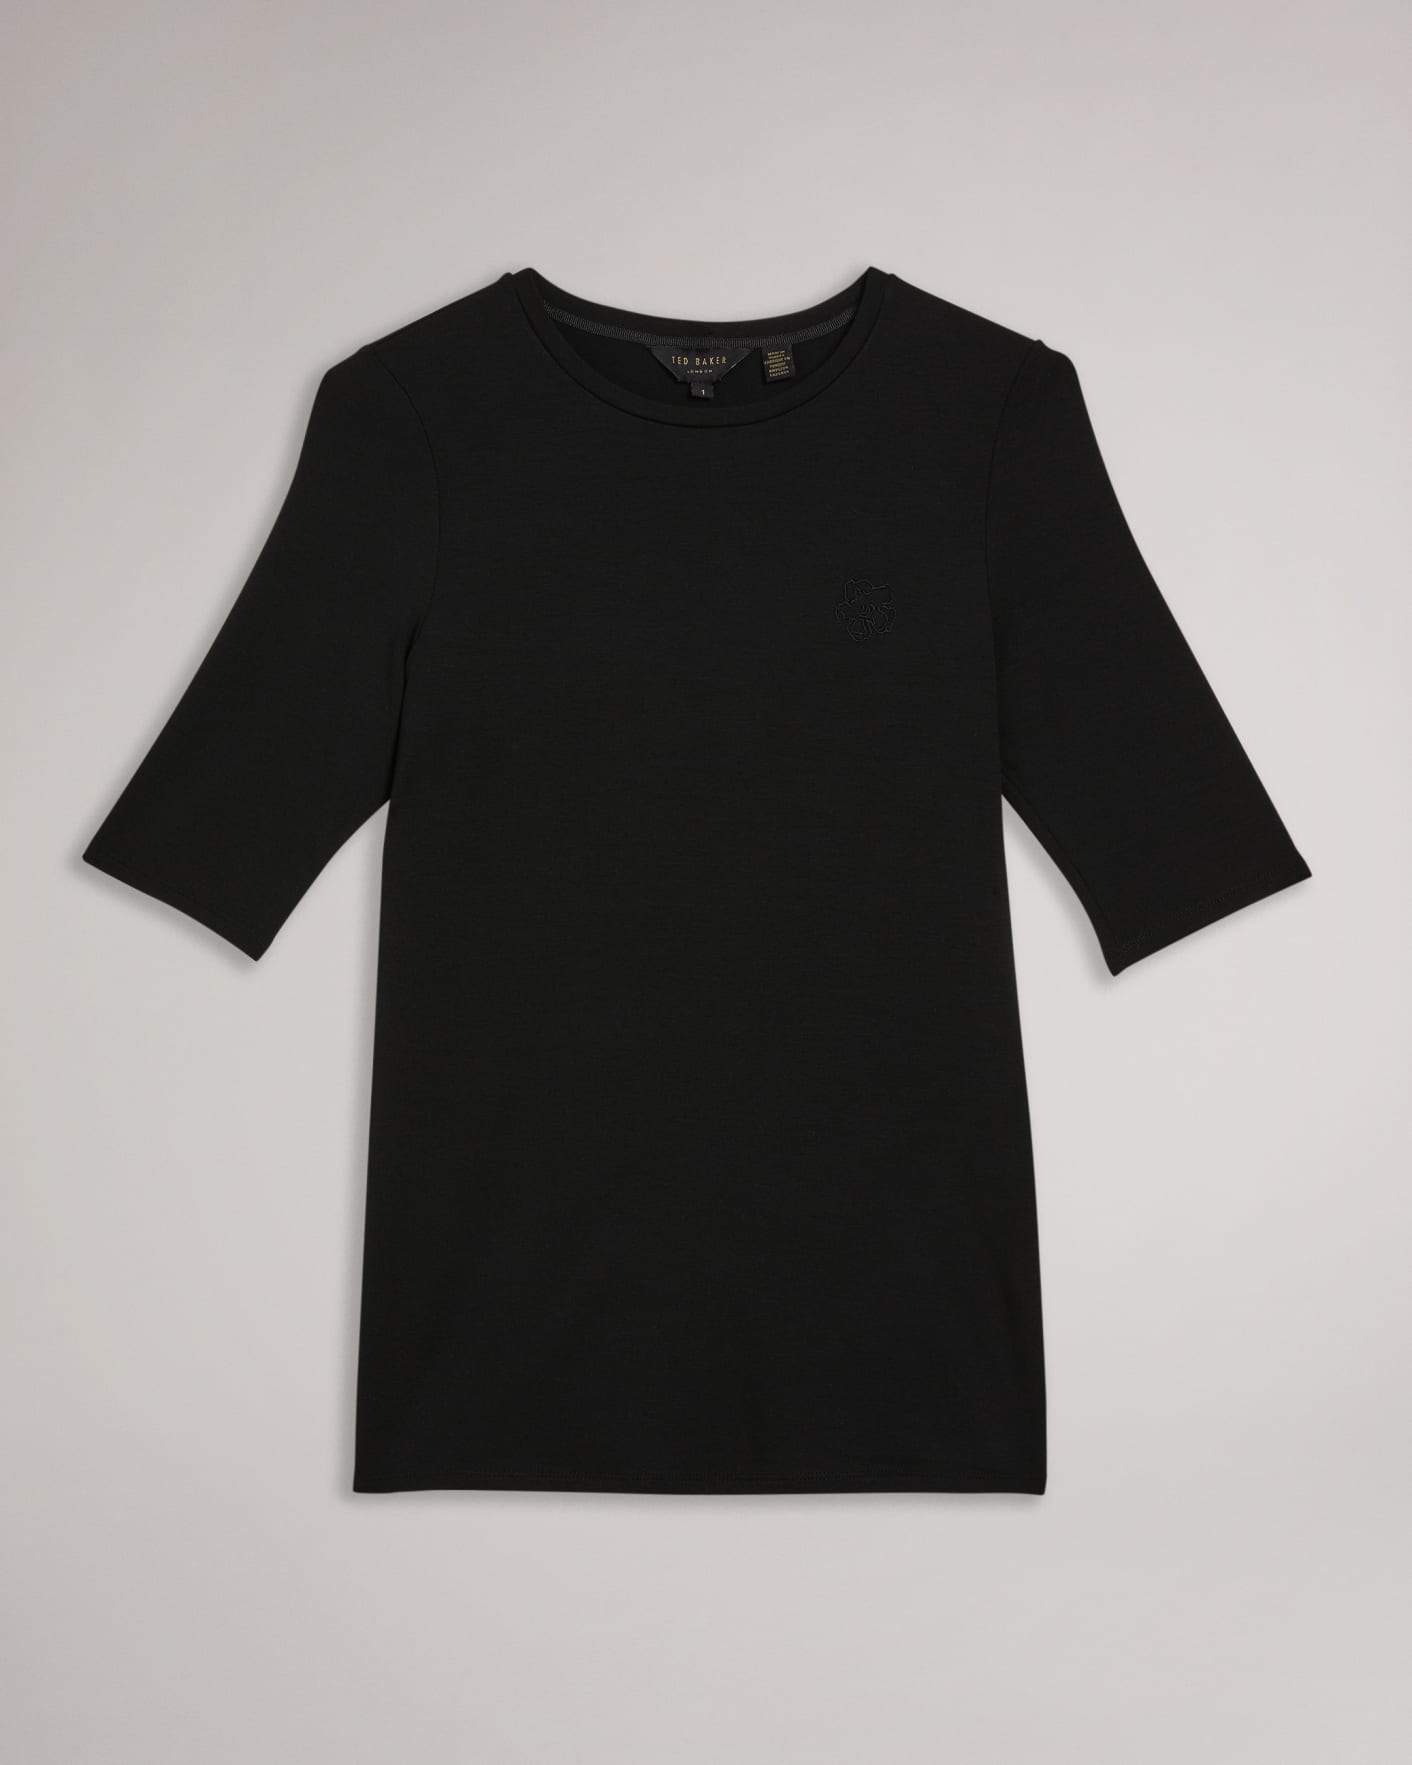 Black Fitted Jersey Tee Ted Baker